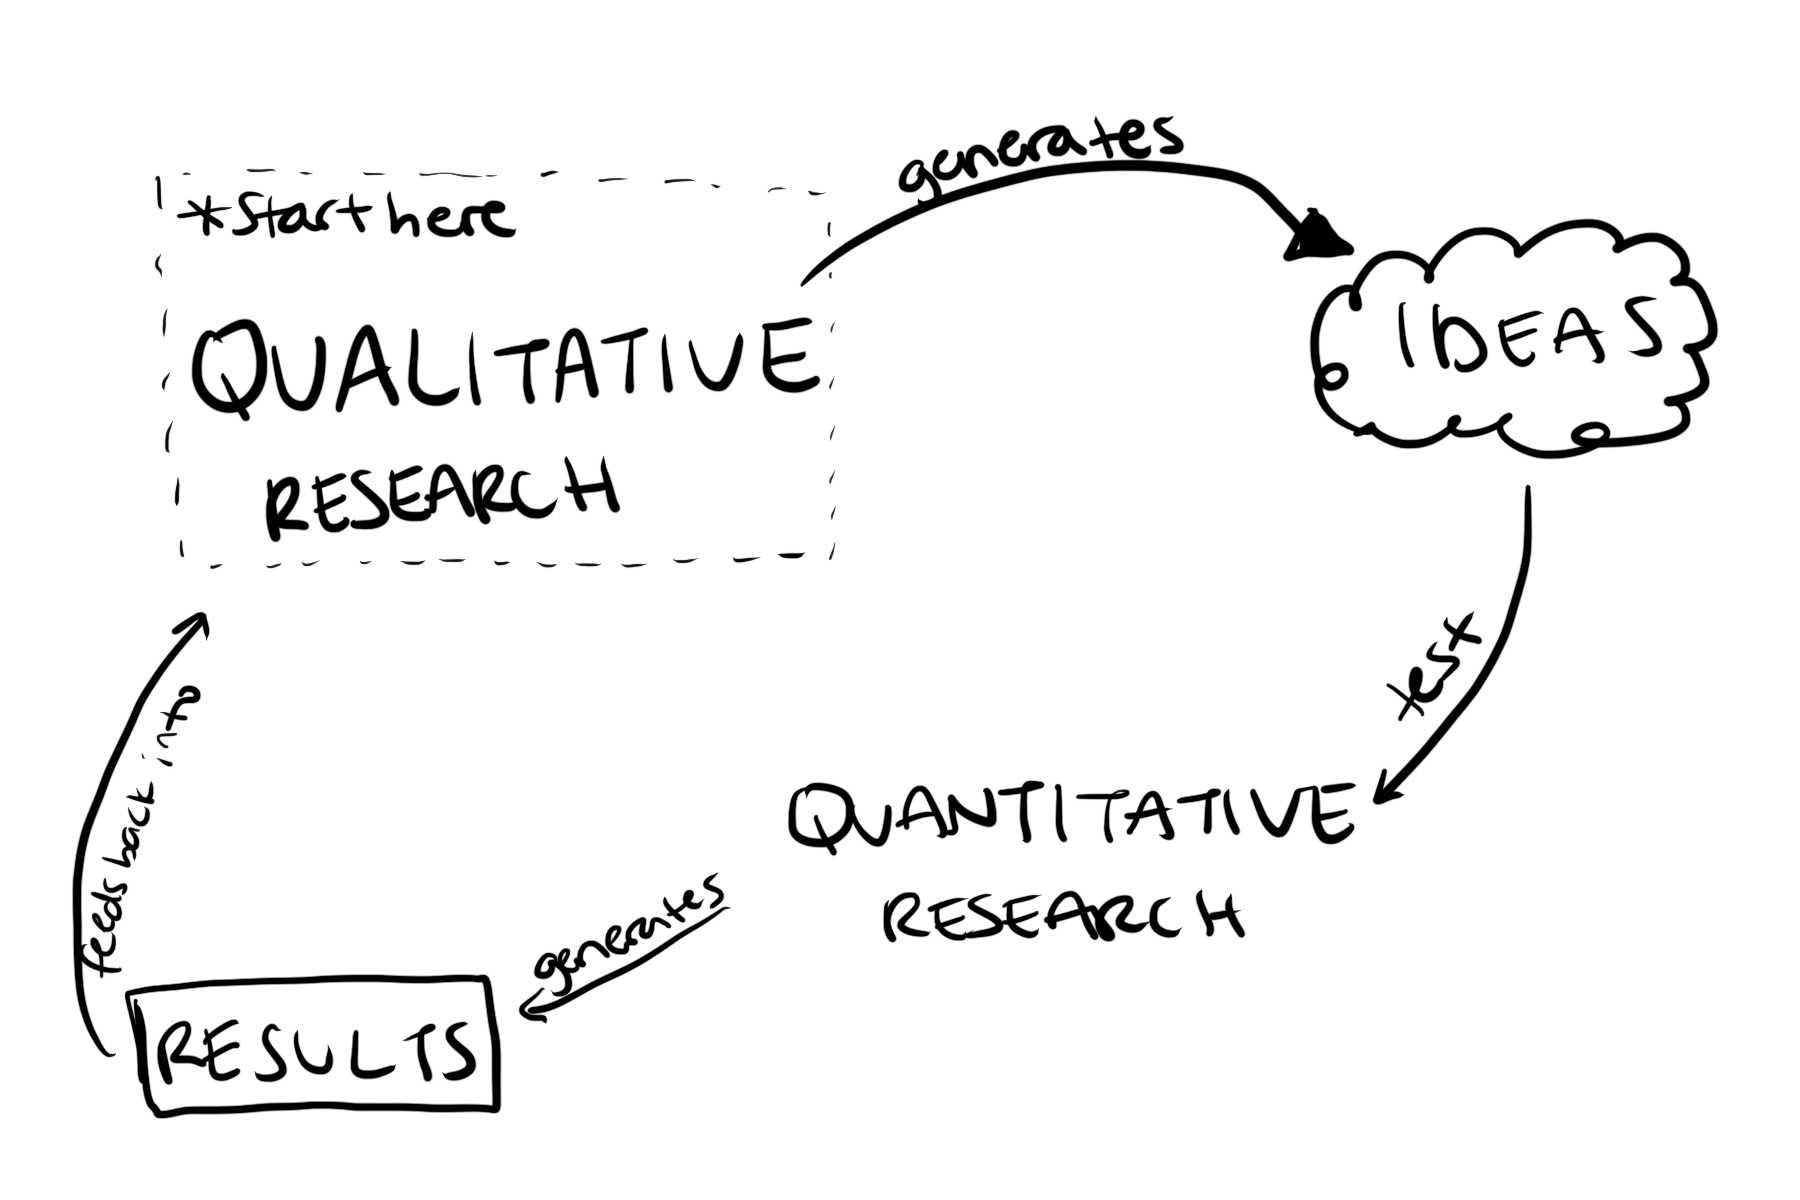 Flow of research